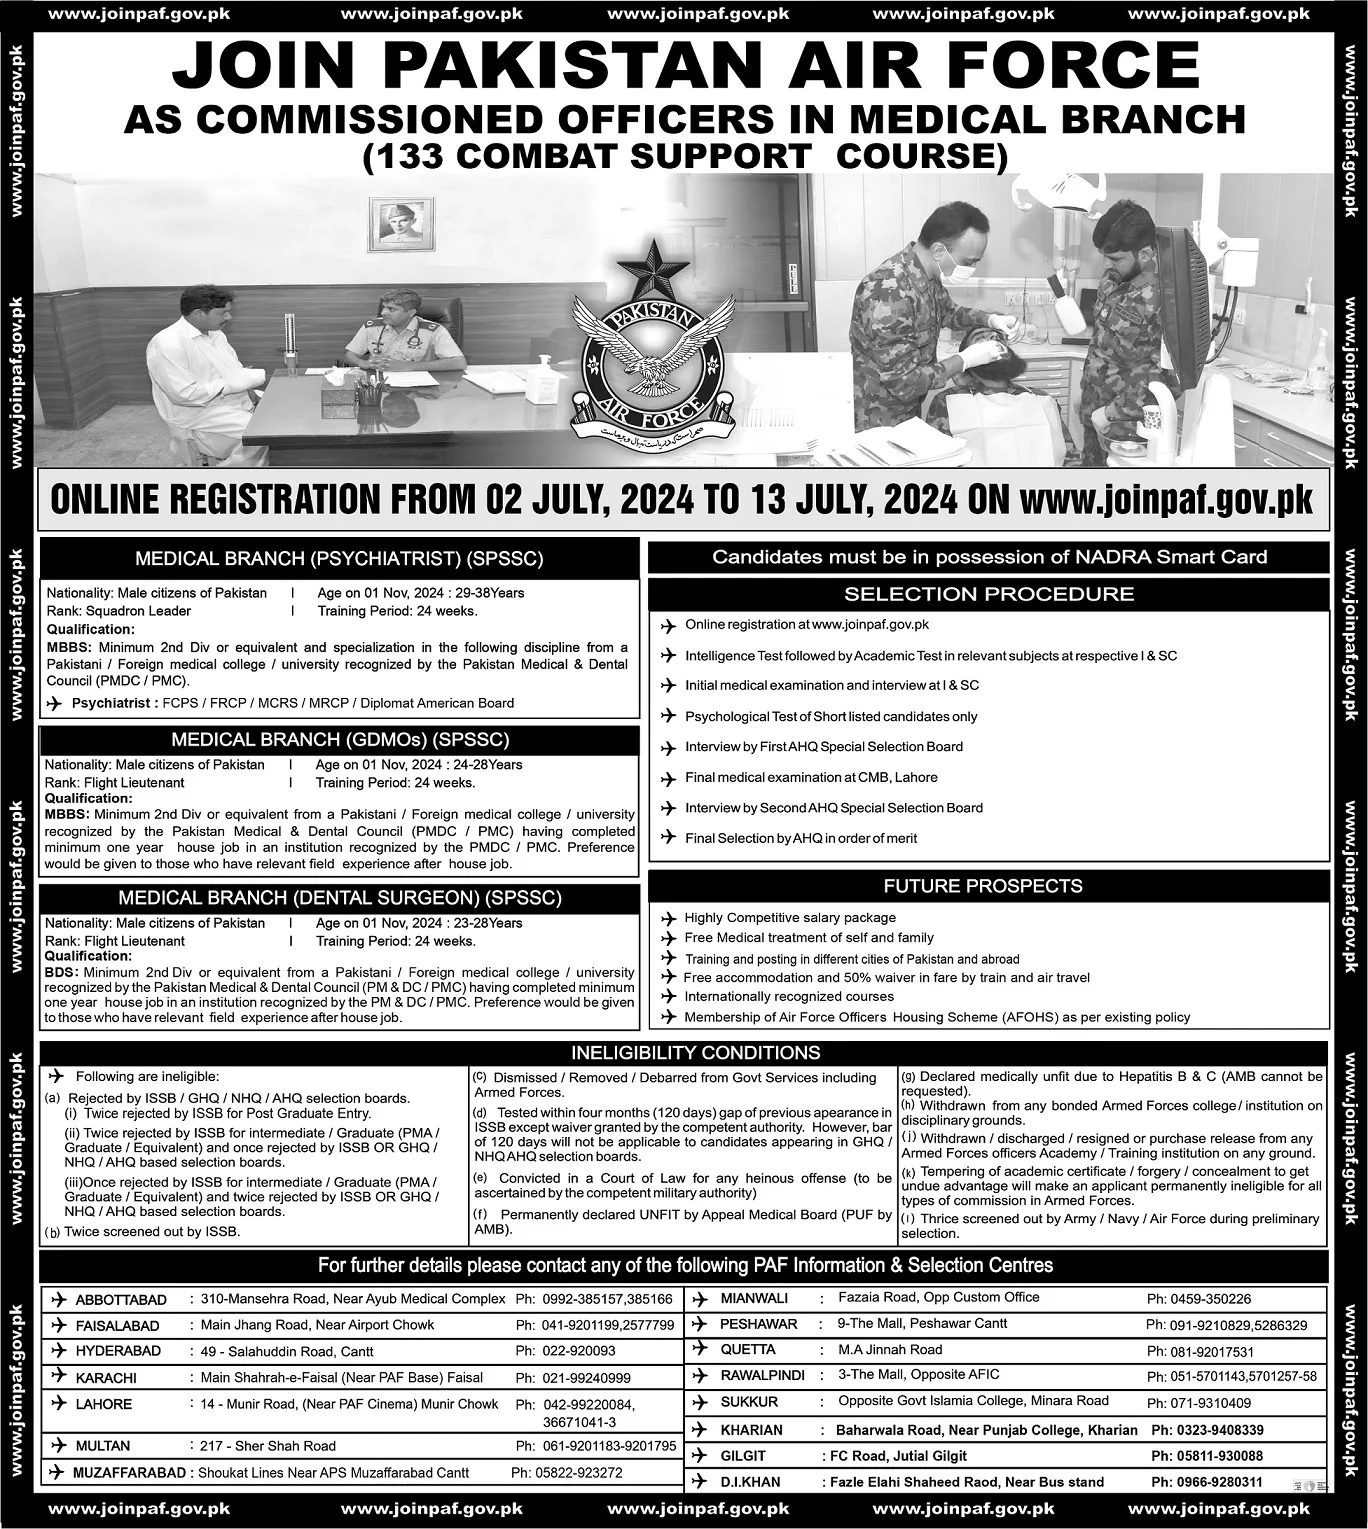 JOIN PAKISTAN AIR FORCE
AS COMMISSIONED OFFICERS IN MEDICAL BRANCH (133 COMBAT SUPPORT COURSE)